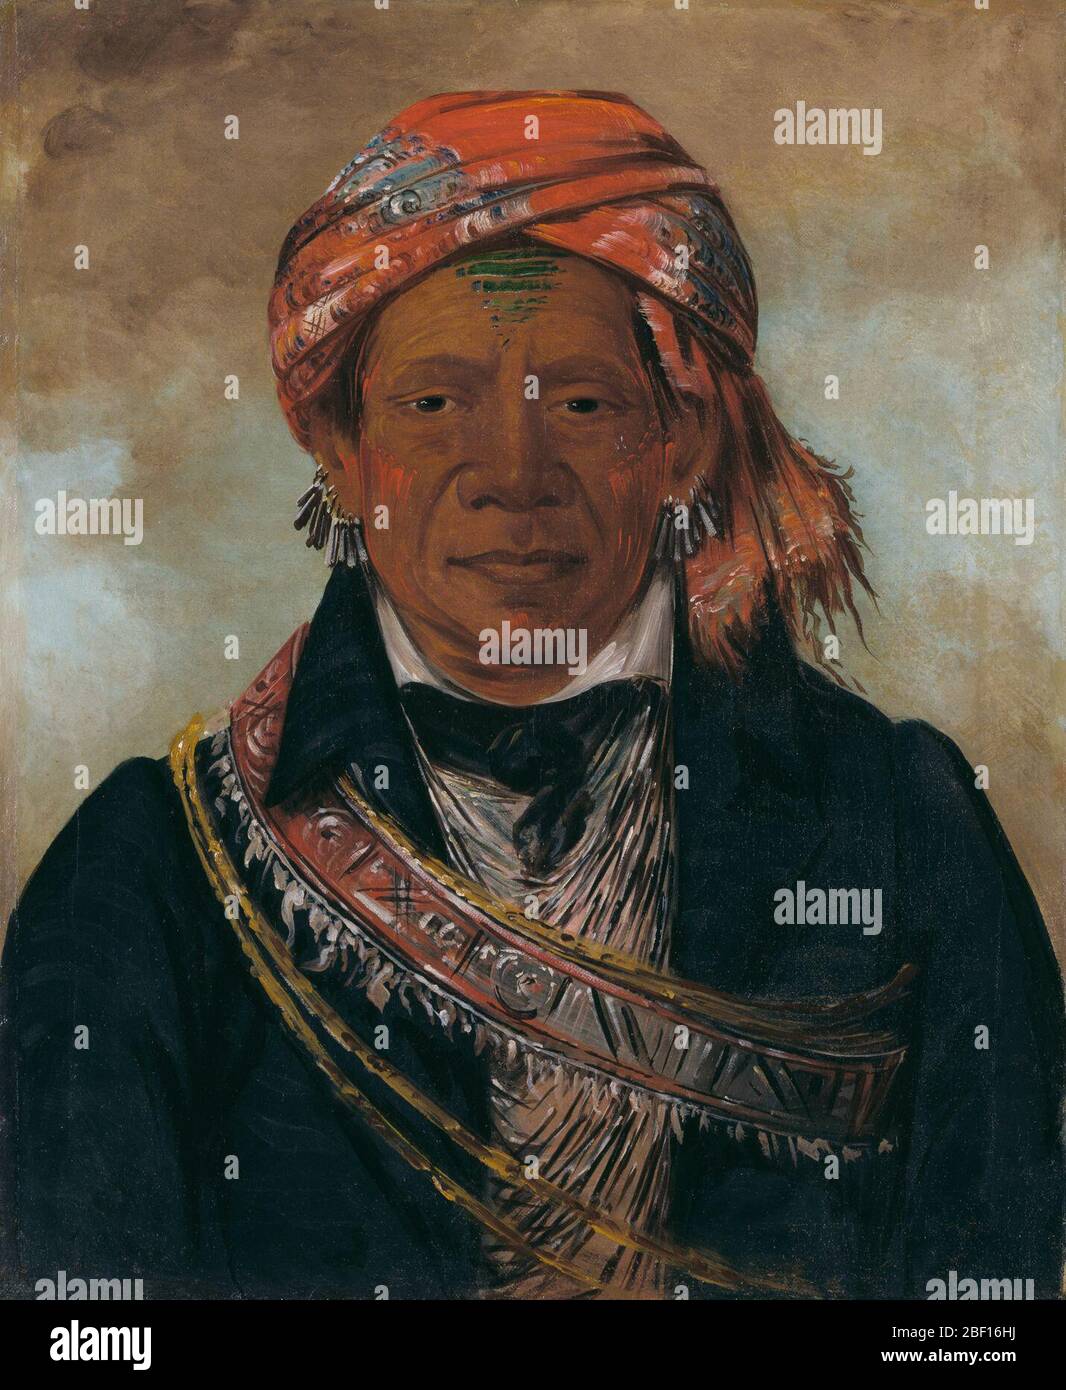 Bdasin Chief of the Tribe. George Catlin probably painted this portrait of Bód-a-sin, chief of the Delaware/Lenape tribe, at Fort Leavenworth (in today’s Kansas) in 1830. Catlin’s efforts from 1830 are generally considered his first attempts at Indian portraits in the West. Stock Photo